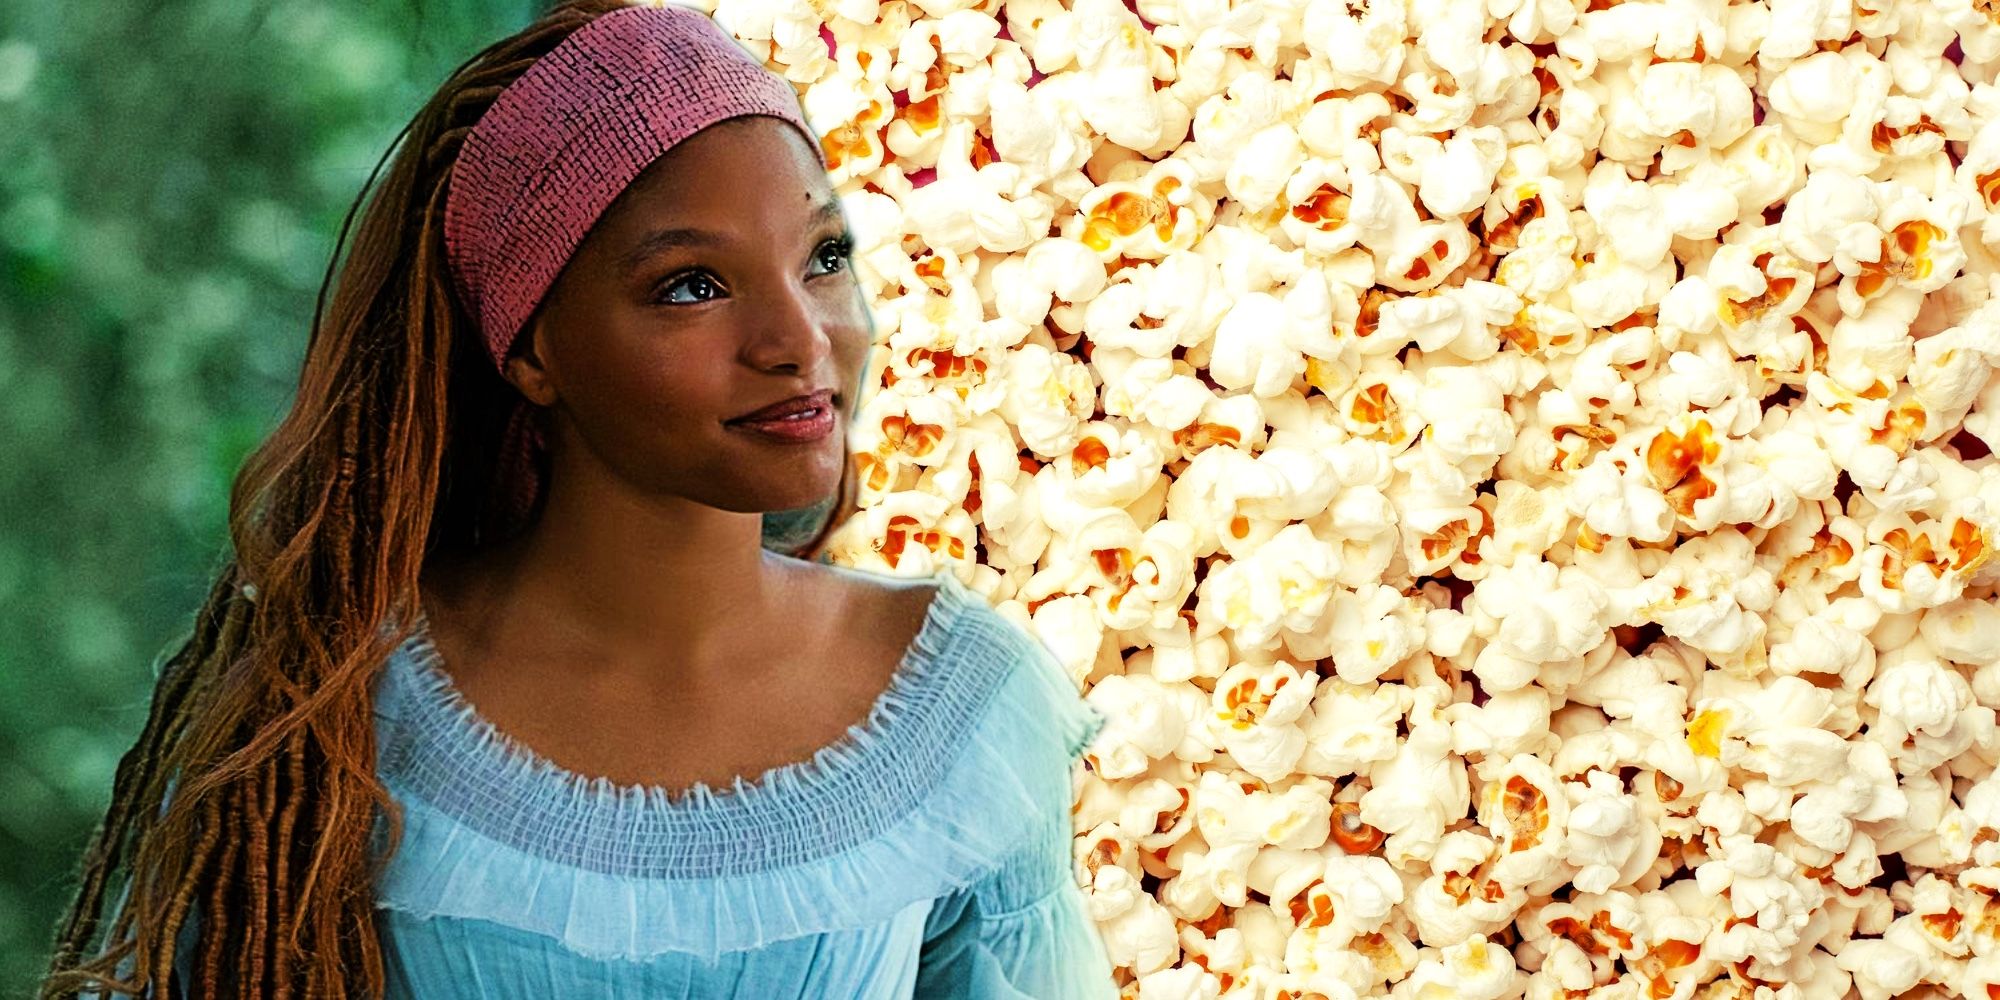 A composite image of The Little Mermaid and Popcorn